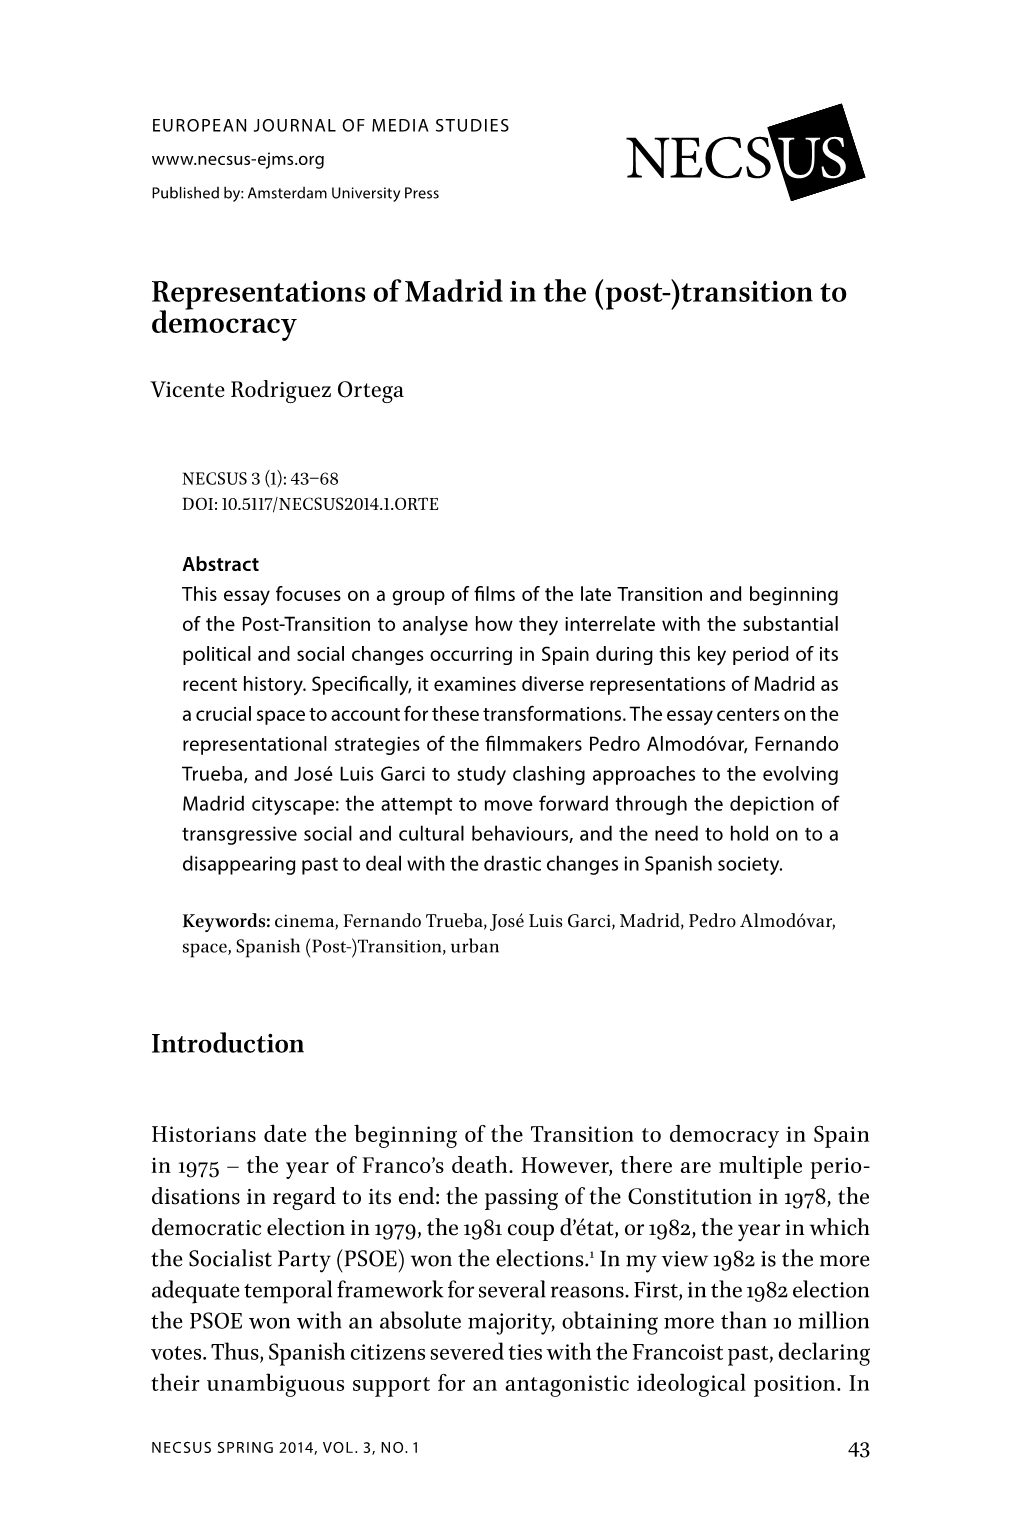 Representations of Madrid in the (Post-)Transition to Democracy